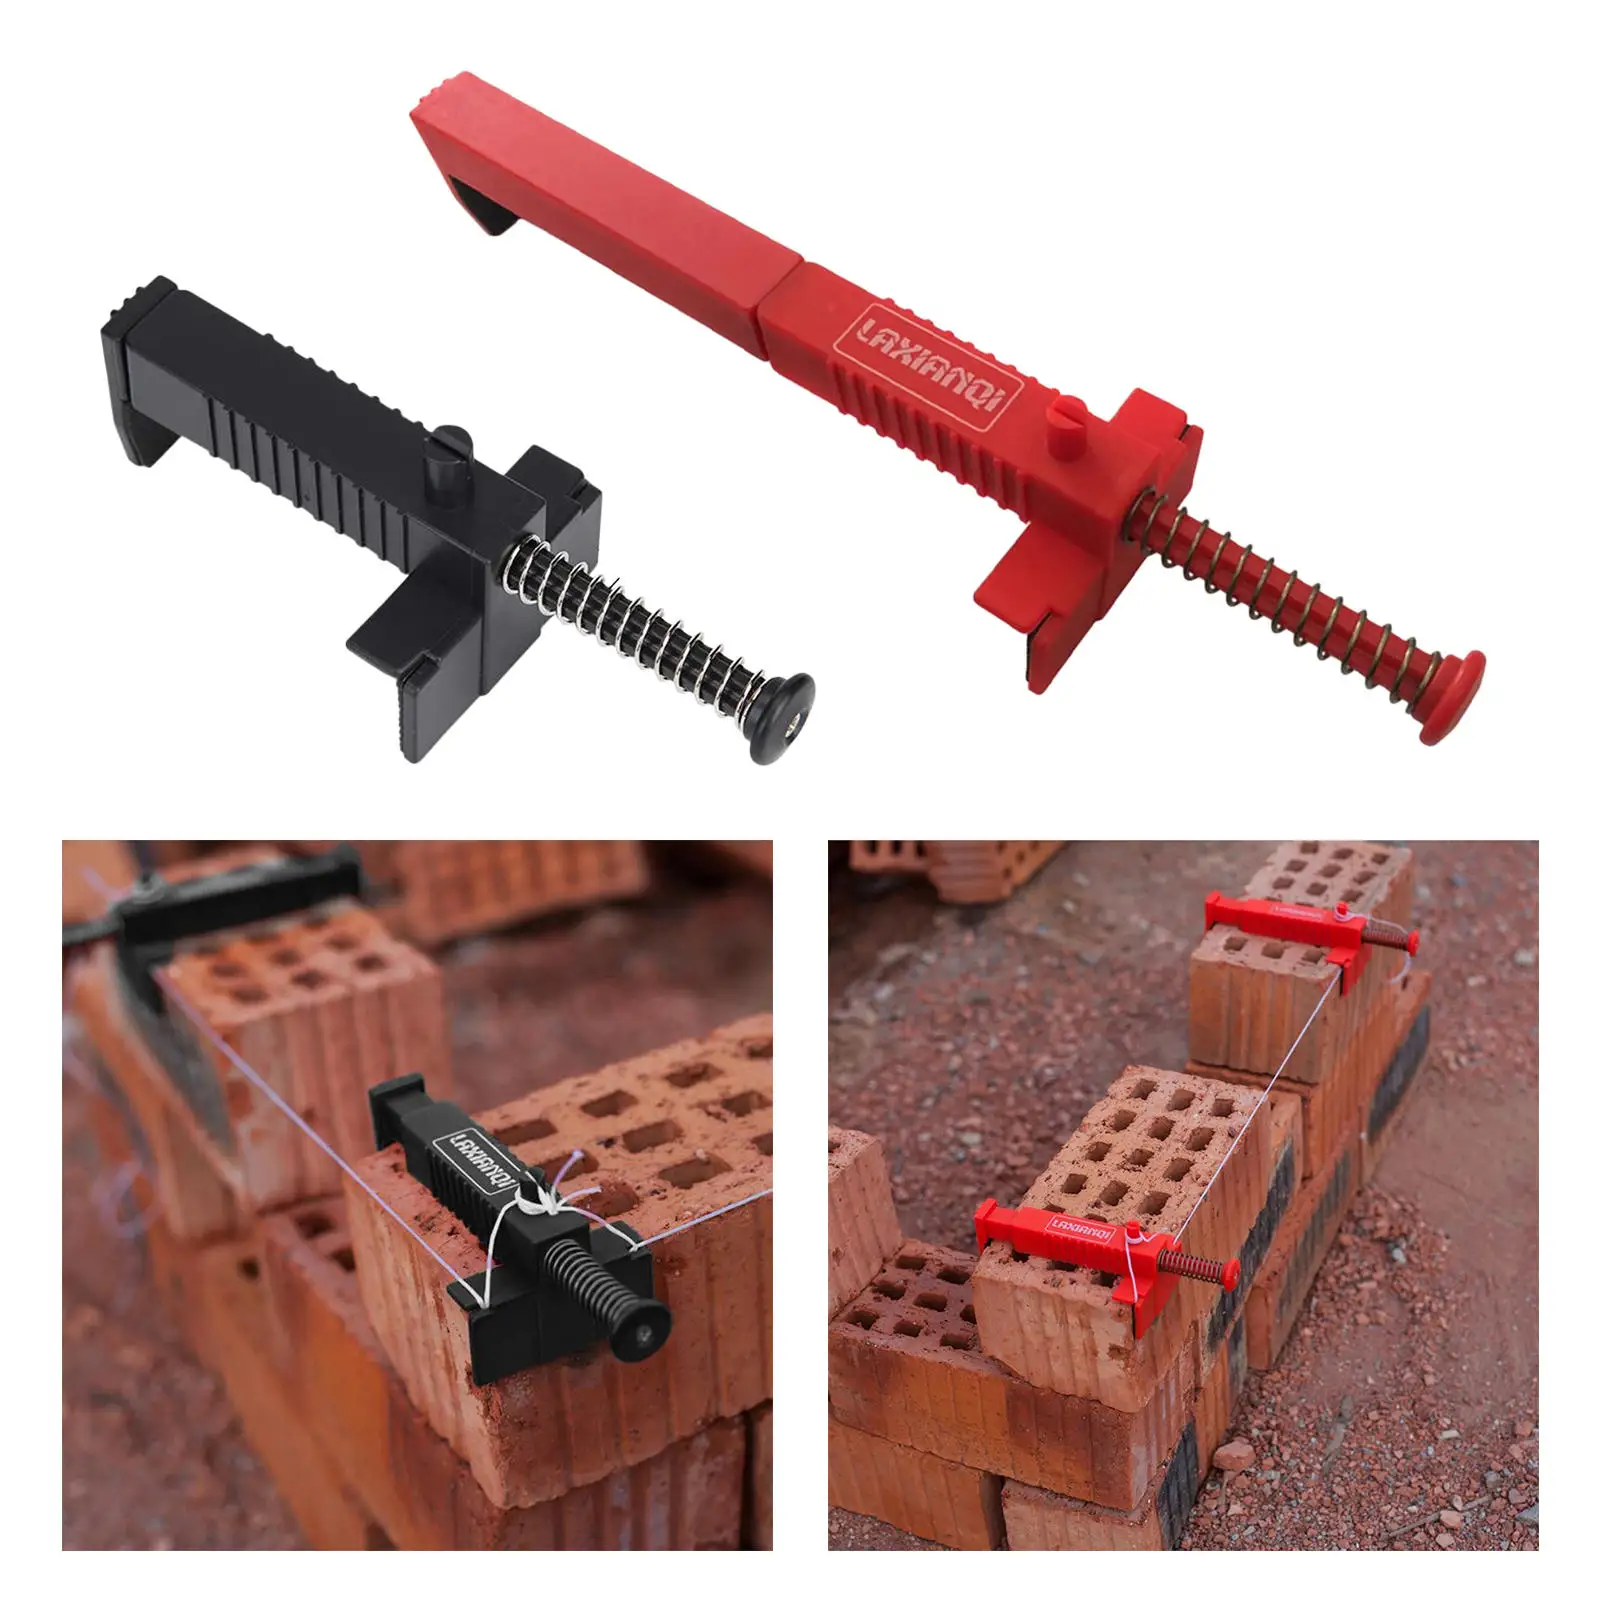 21-24cm Wire Drawer Bricklaying Tool Fixer Bricklaying Puller Bricklayer Hardware Brick Clamps Liner for Wallworkers Bricklaying